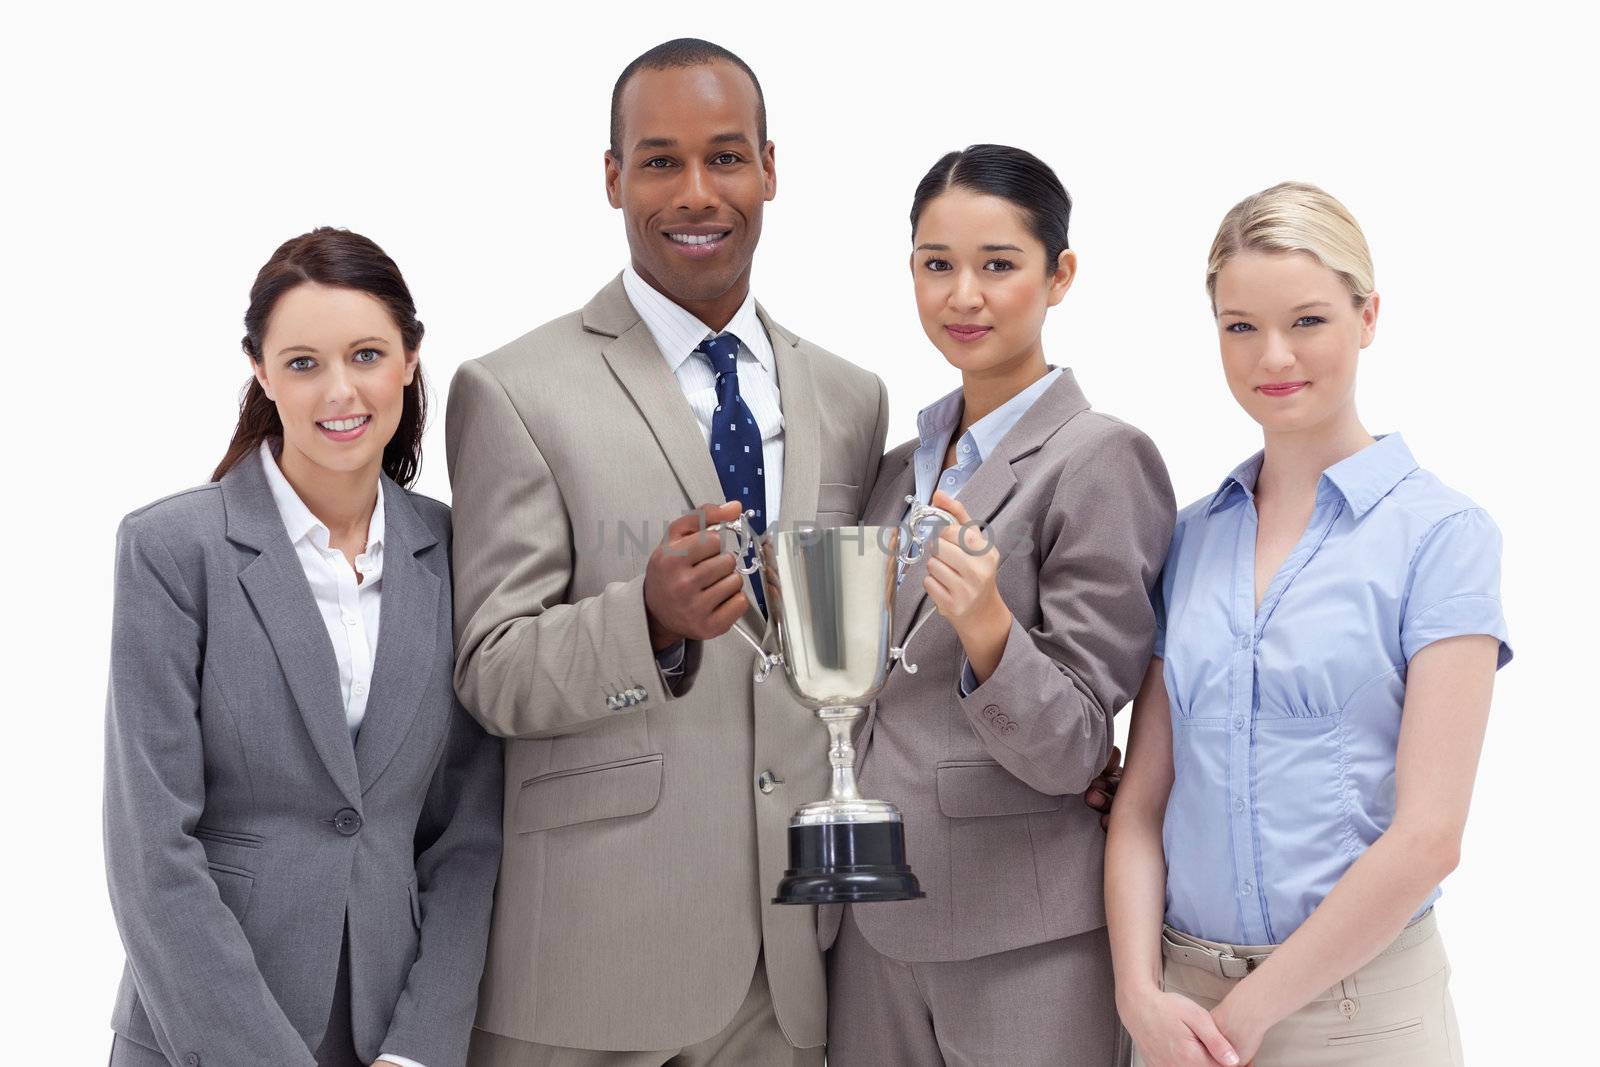 Close-up of a business team holding a cup against white background